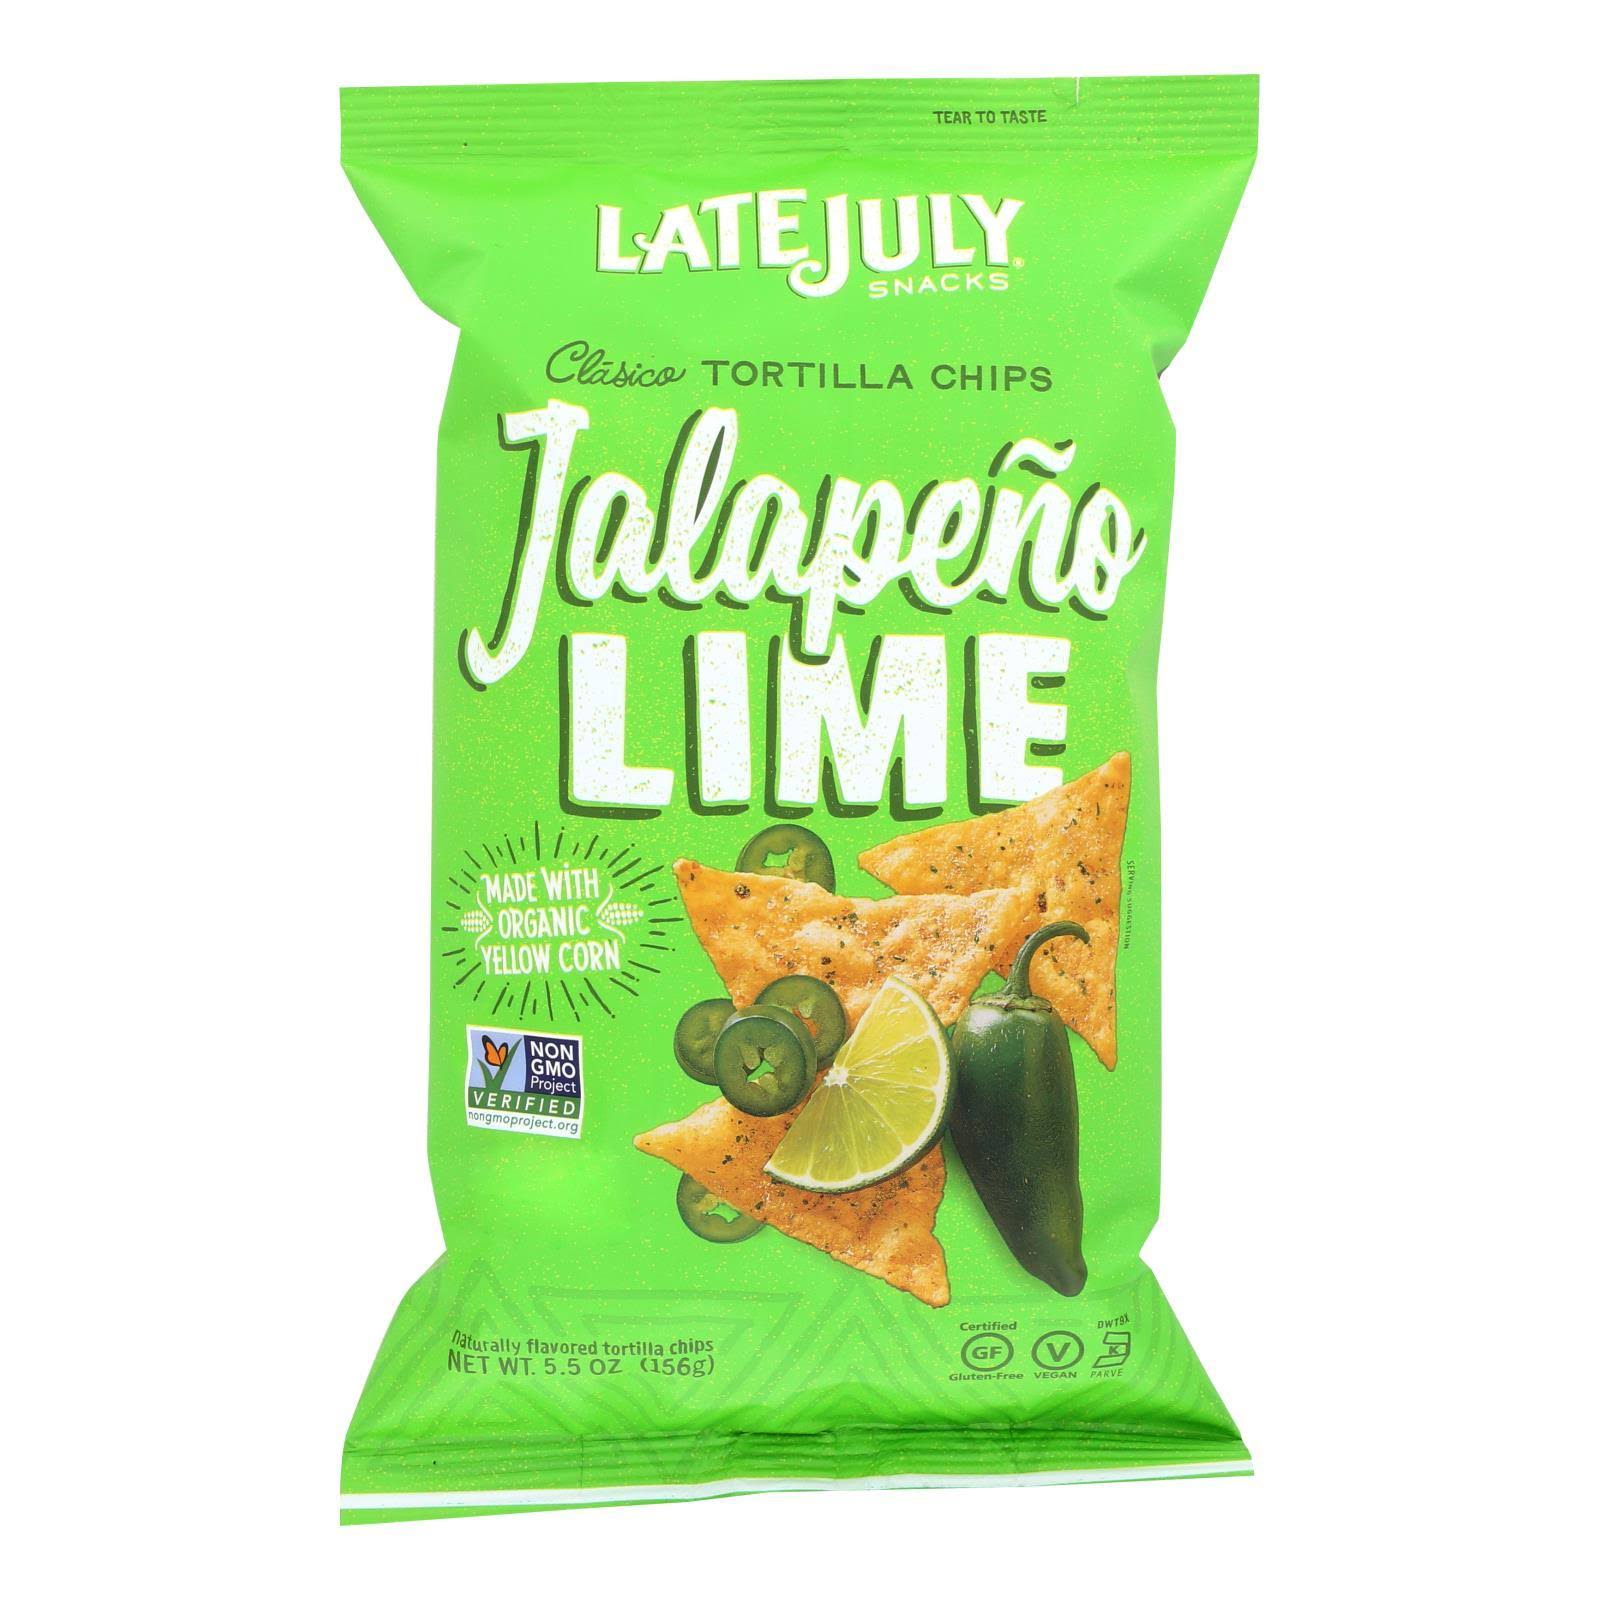 Late July Classic Tortilla Chips - Jalapeno Lime, 5.5oz